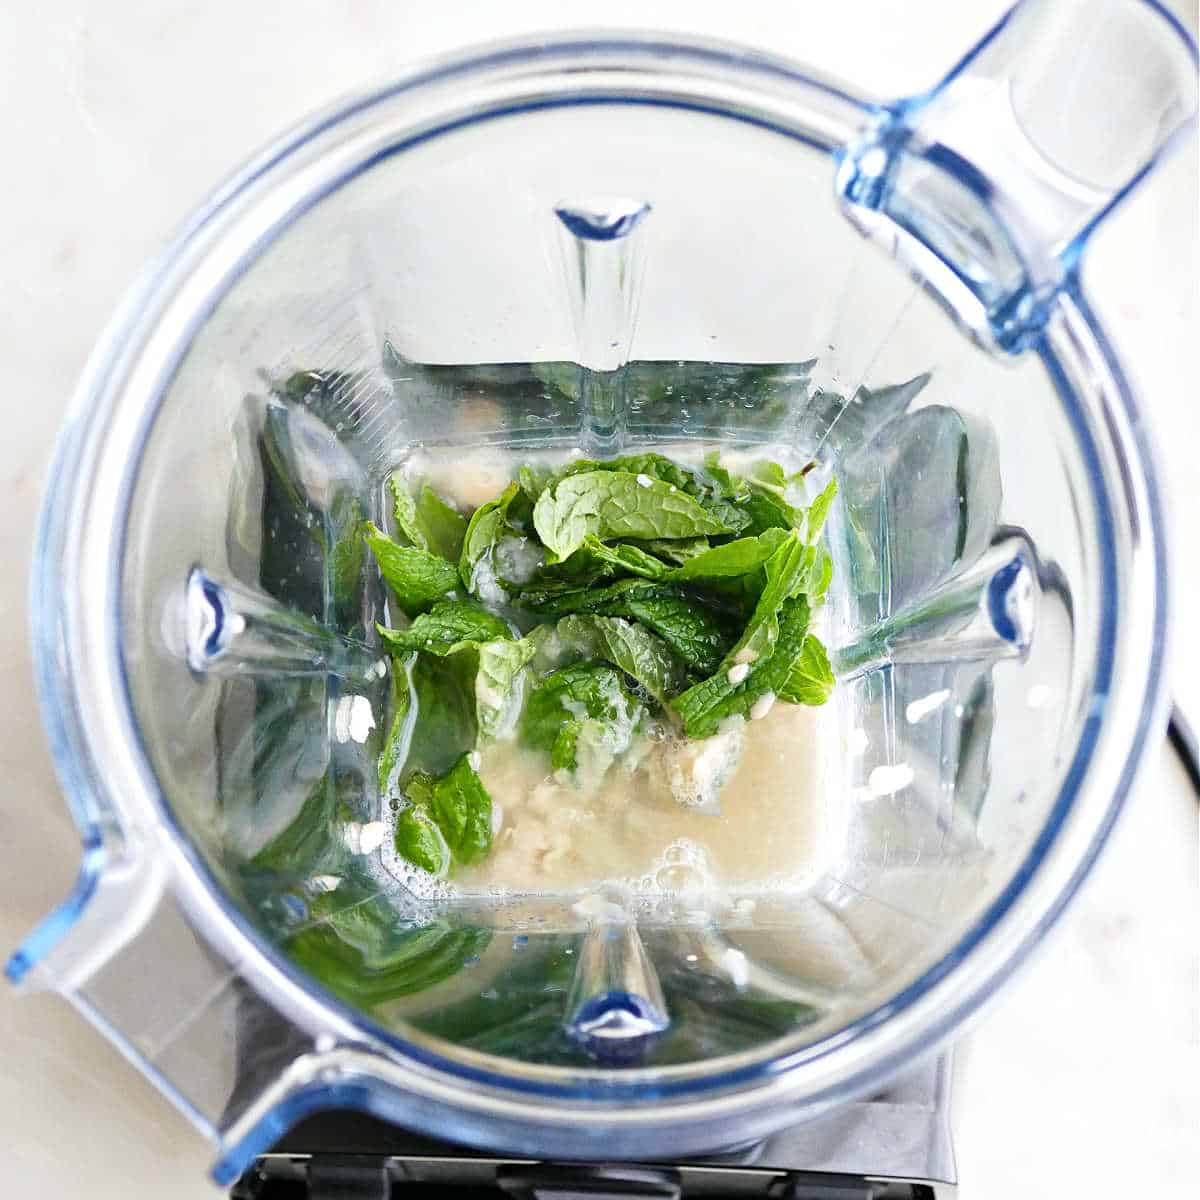 mint, tahini, maple syrup, garlic, and lemon juice in a blender